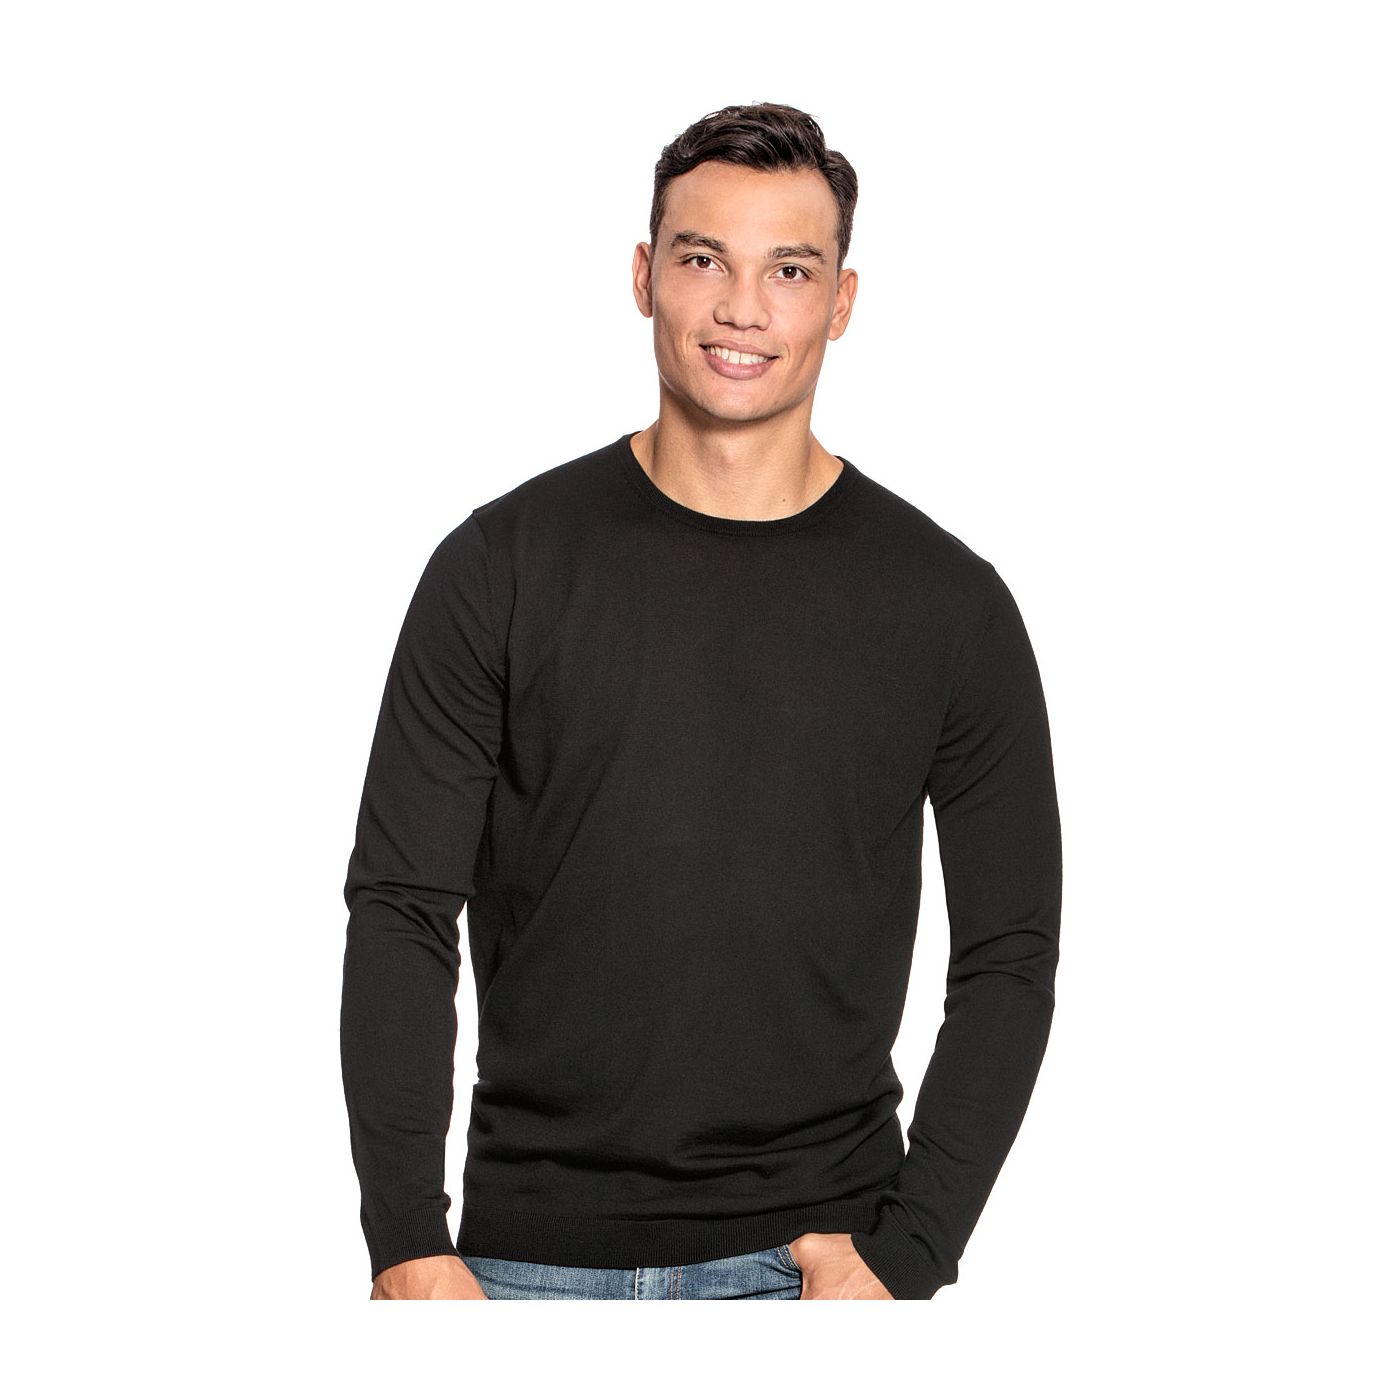 Extra long crew neck sweater for men made of Merino wool in Black